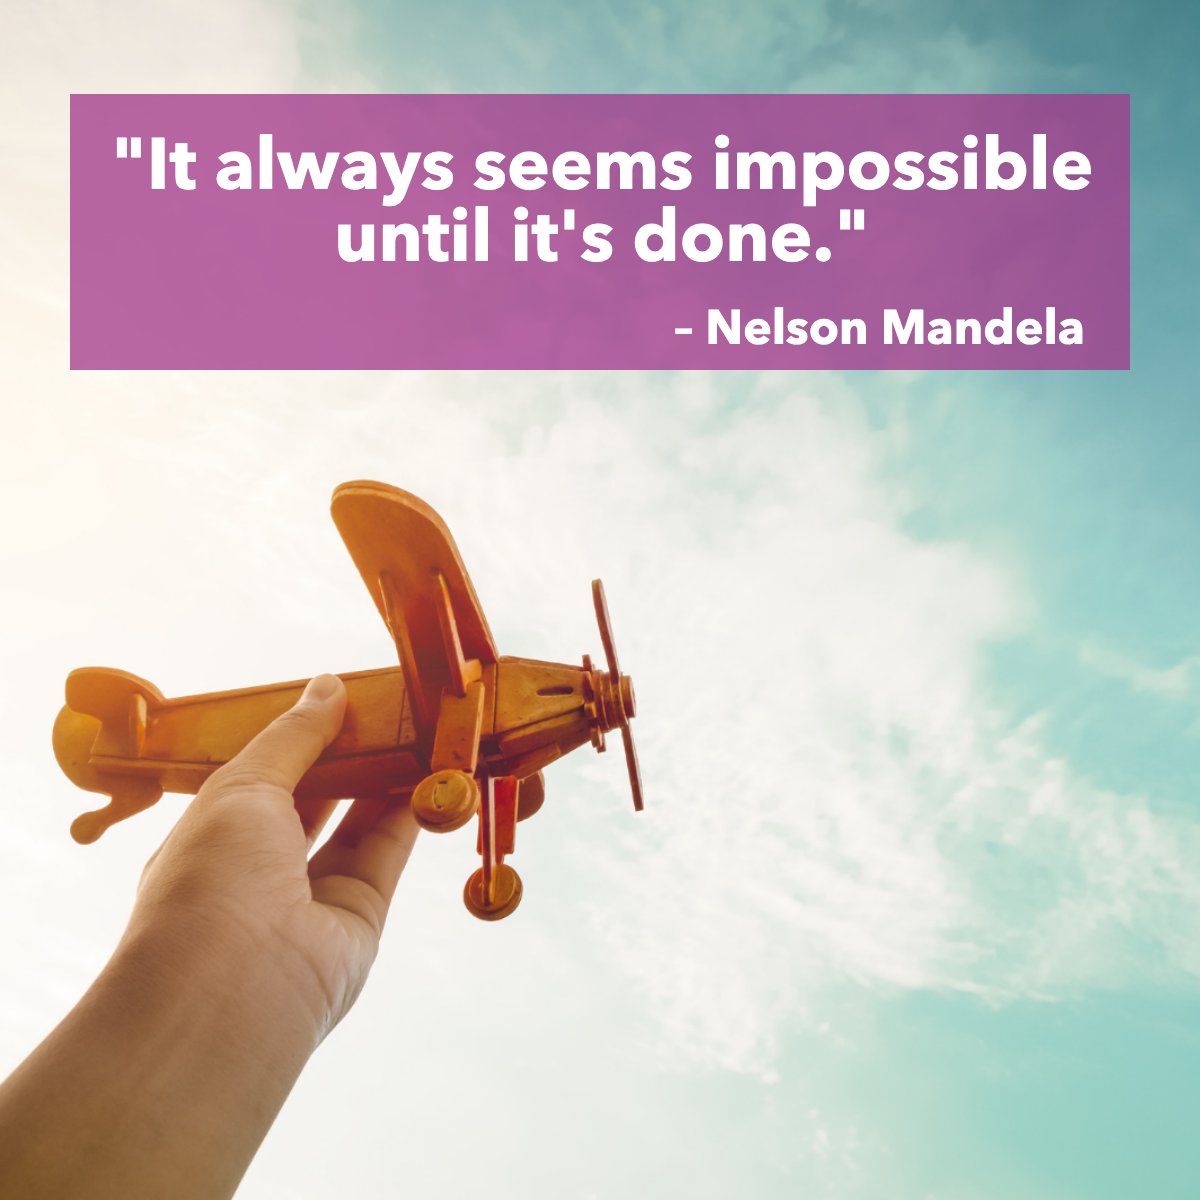 'It always seems impossible until it's done.' 
– Nelson Mandela

What big things are you taking on this week?

#airplane #toyairplane #impossible #fly #quote #inspirational #sky #nelsonmandela
 #lasvegasrealtor #lasvegasrealestate #sparrowsells #lasvegashomes